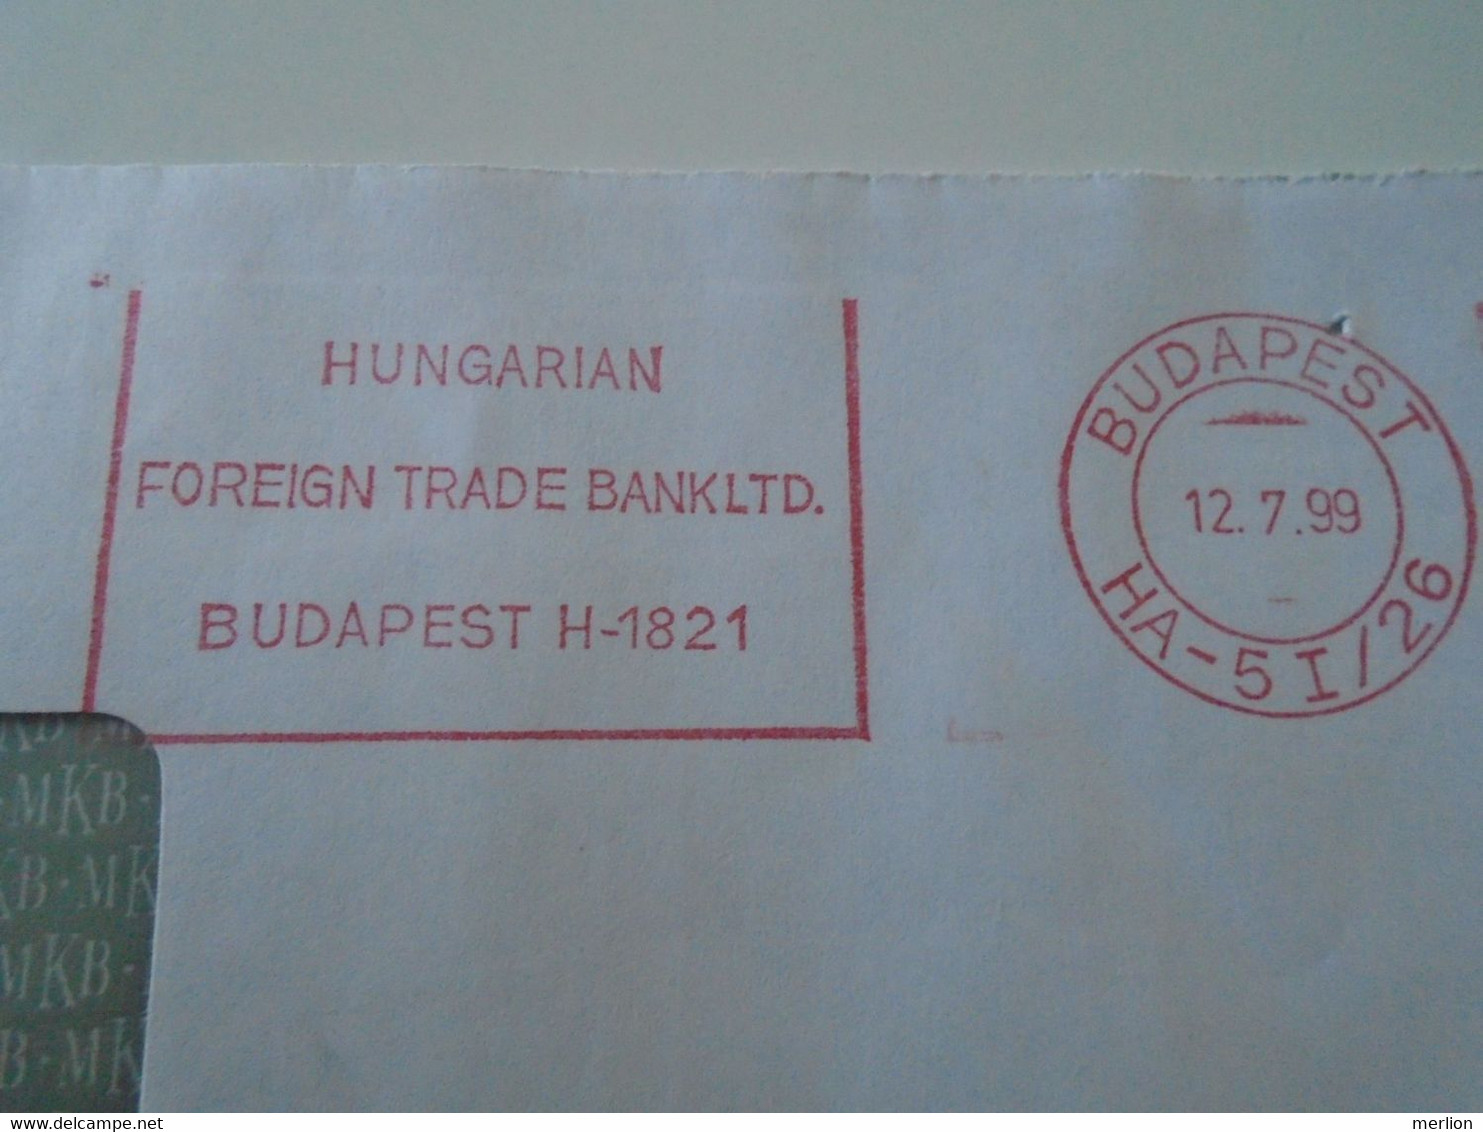 AD00012.119  Hungary Cover  -EMA Red Meter Freistempel-   1999   Budapest  MKB - Hungarian Foreign Trade Bank - Automatenmarken [ATM]